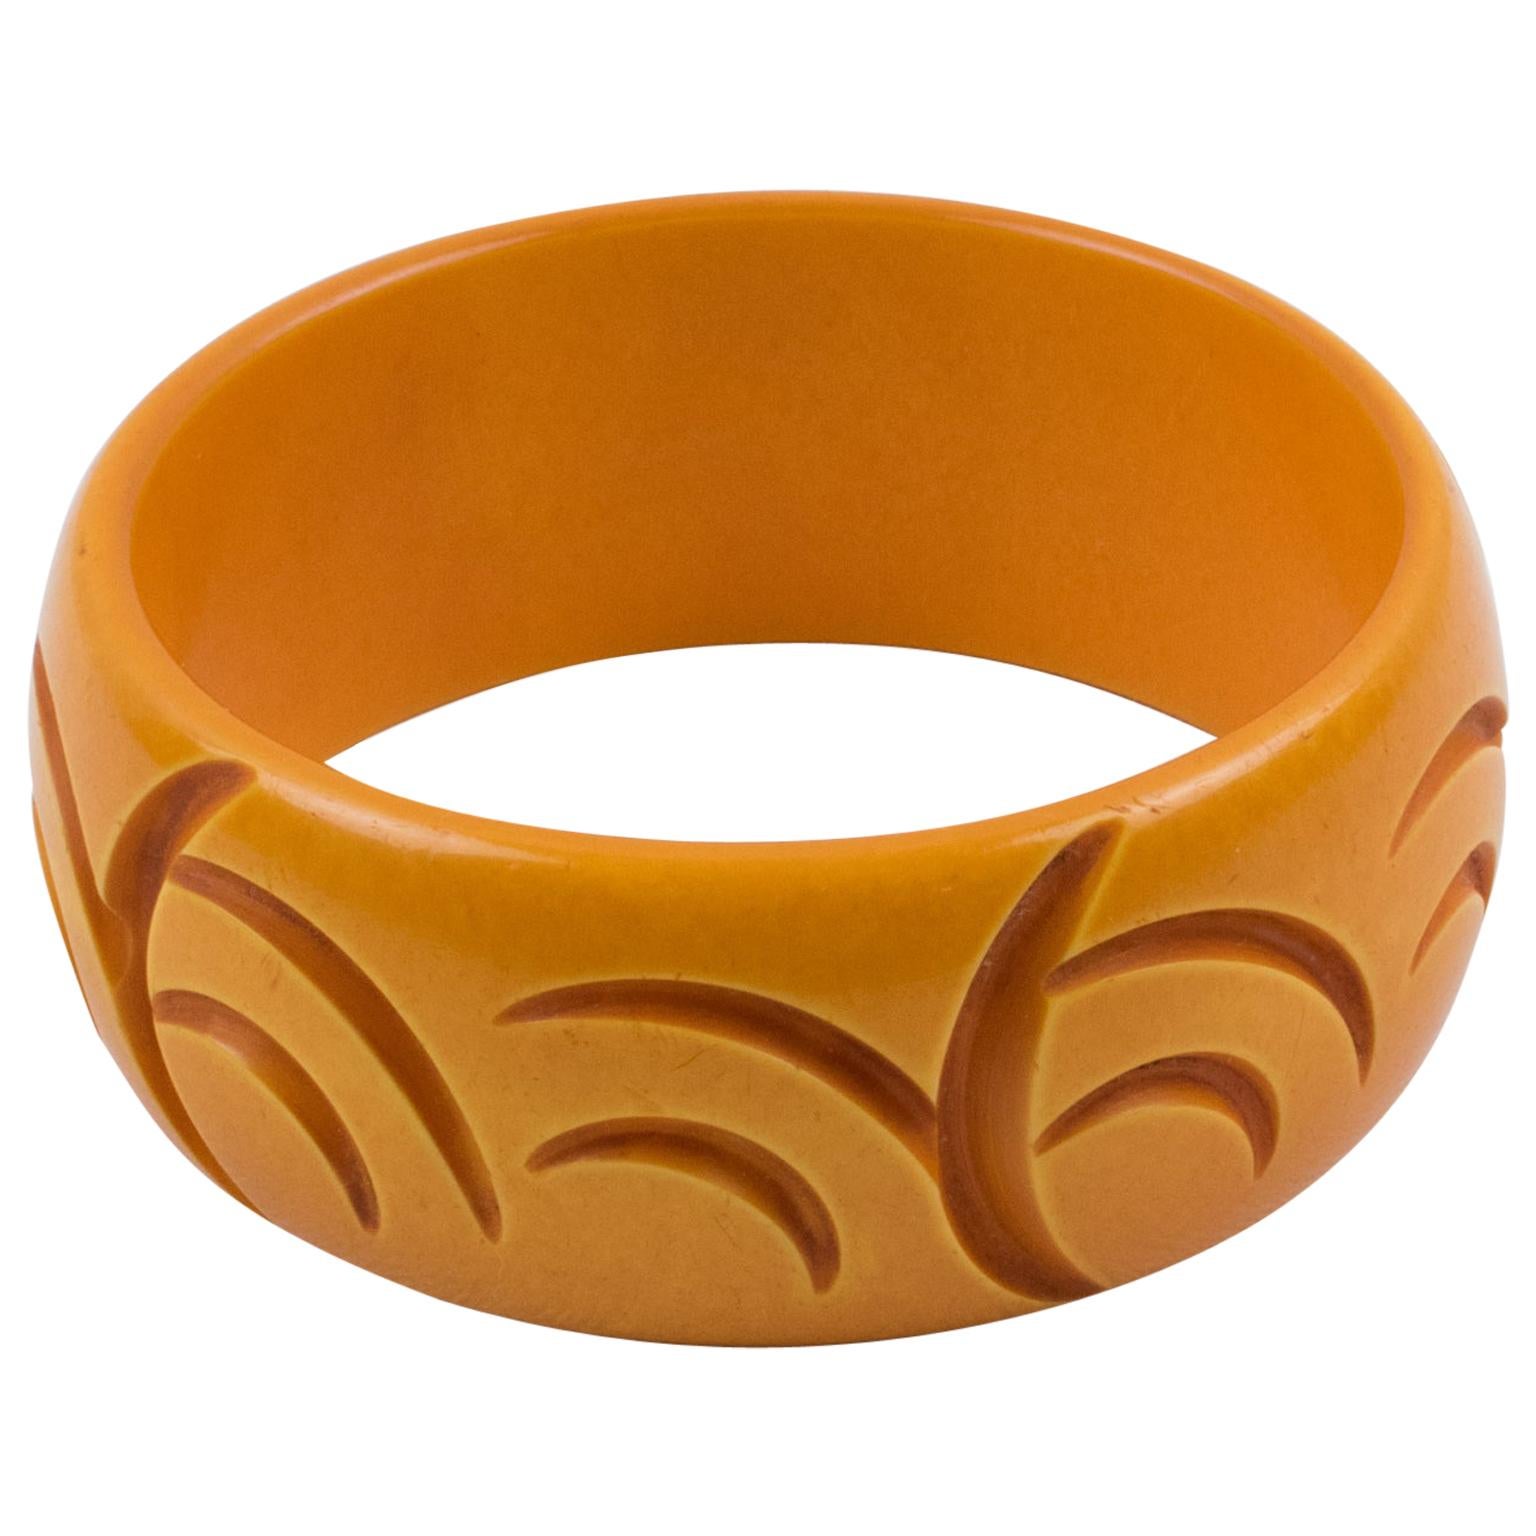 Charming butterscotch Bakelite bracelet bangle. Chunky domed shape with deep geometric carving all around featuring a crescent design. Intense butterscotch yellow-orange color. 
Measurements: Inside across is 2.57 in diameter (6.5 cm) - outside